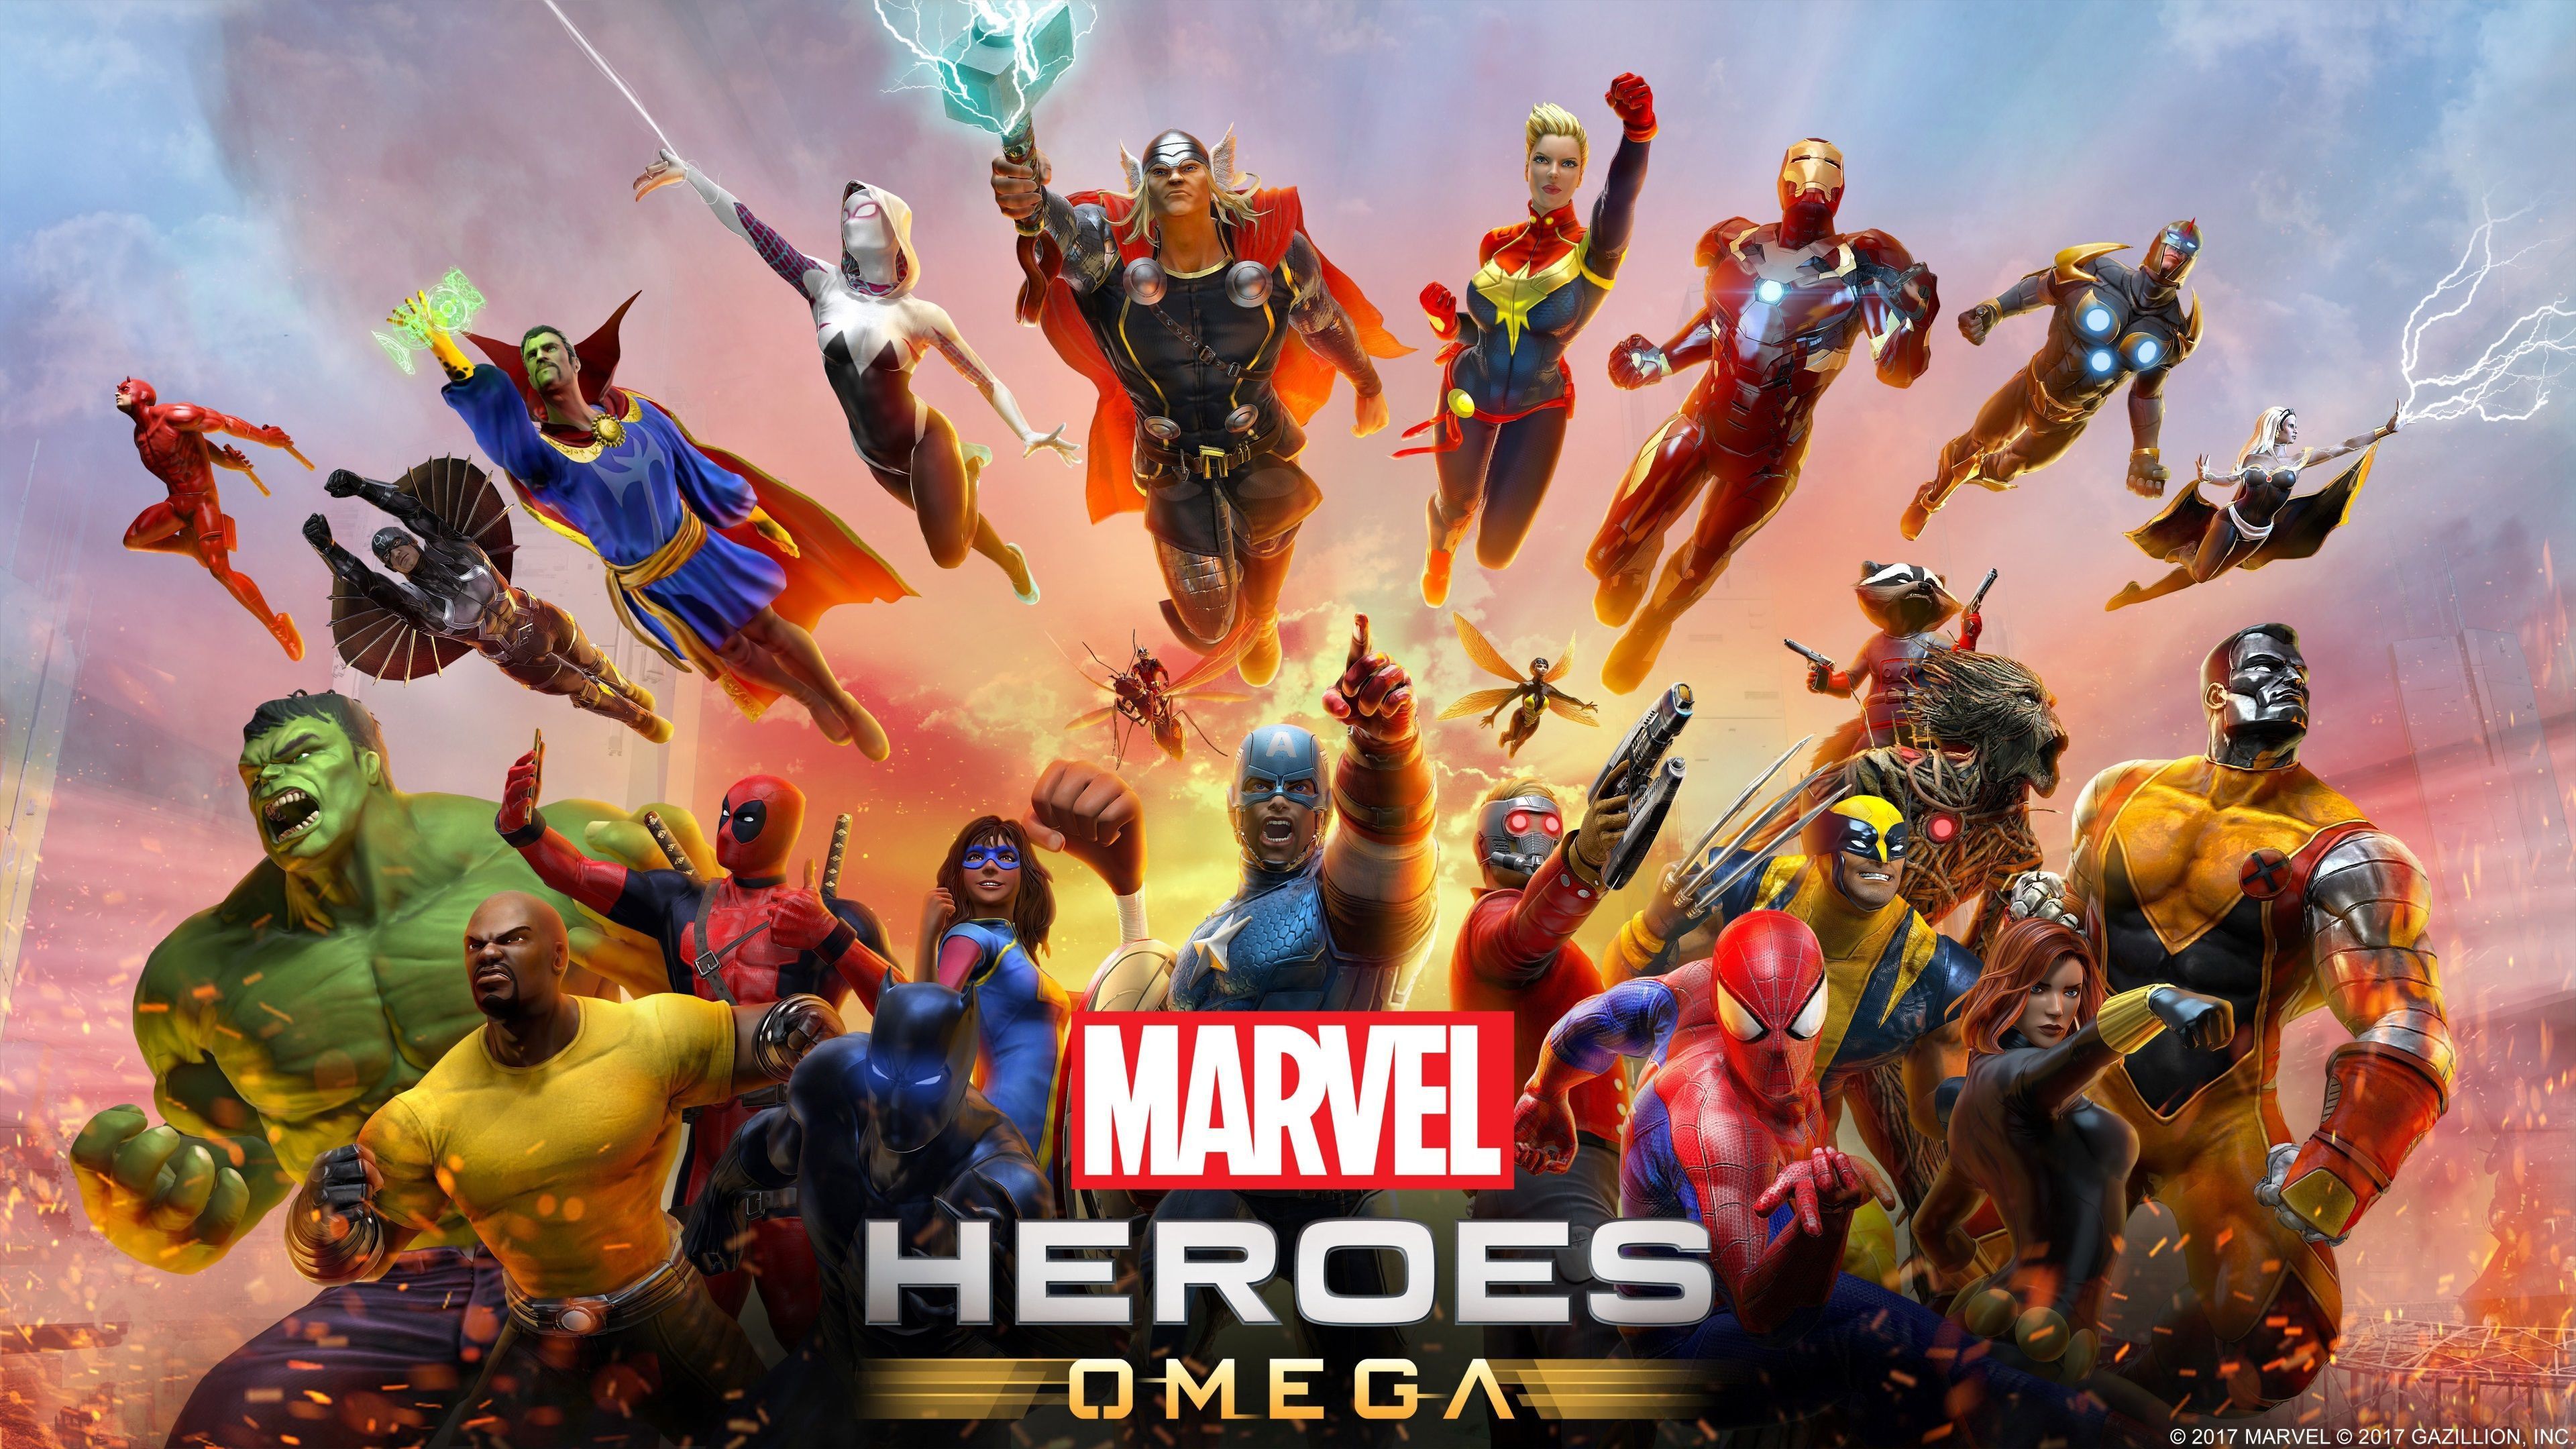 Marvel Characters Wallpaper Free Marvel Characters